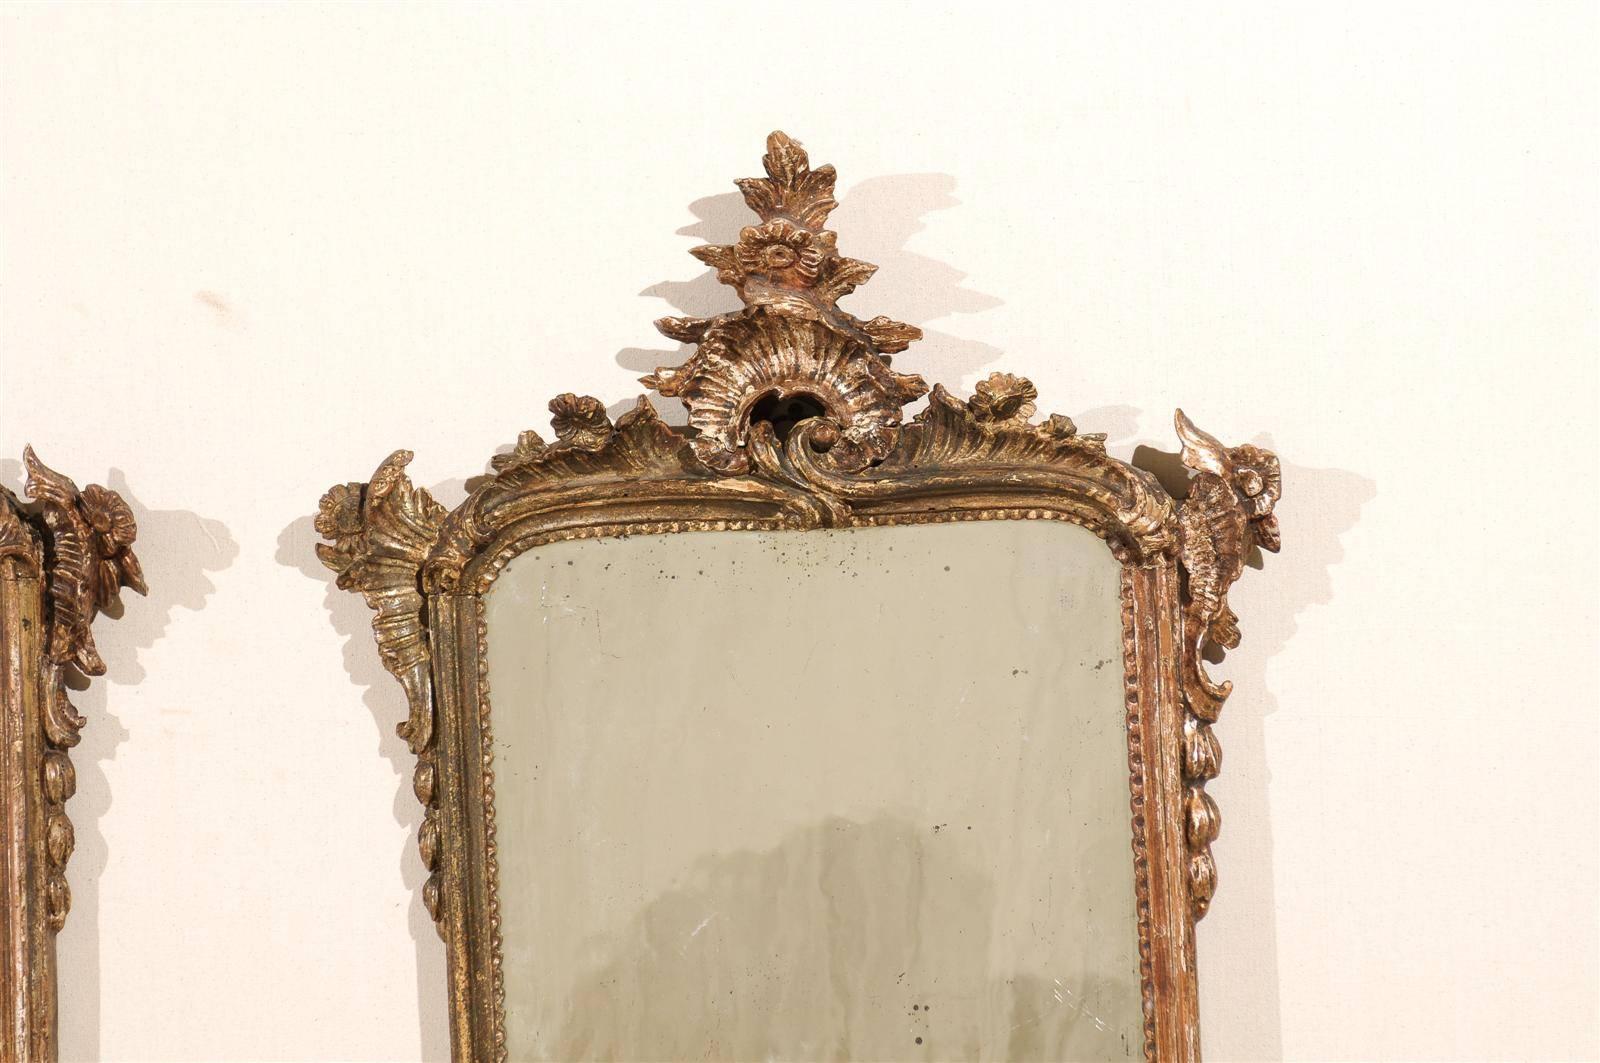 Wood Pair of 18th Century Italian Mirrors in Rococo Style with Nicely Aged Gold Color